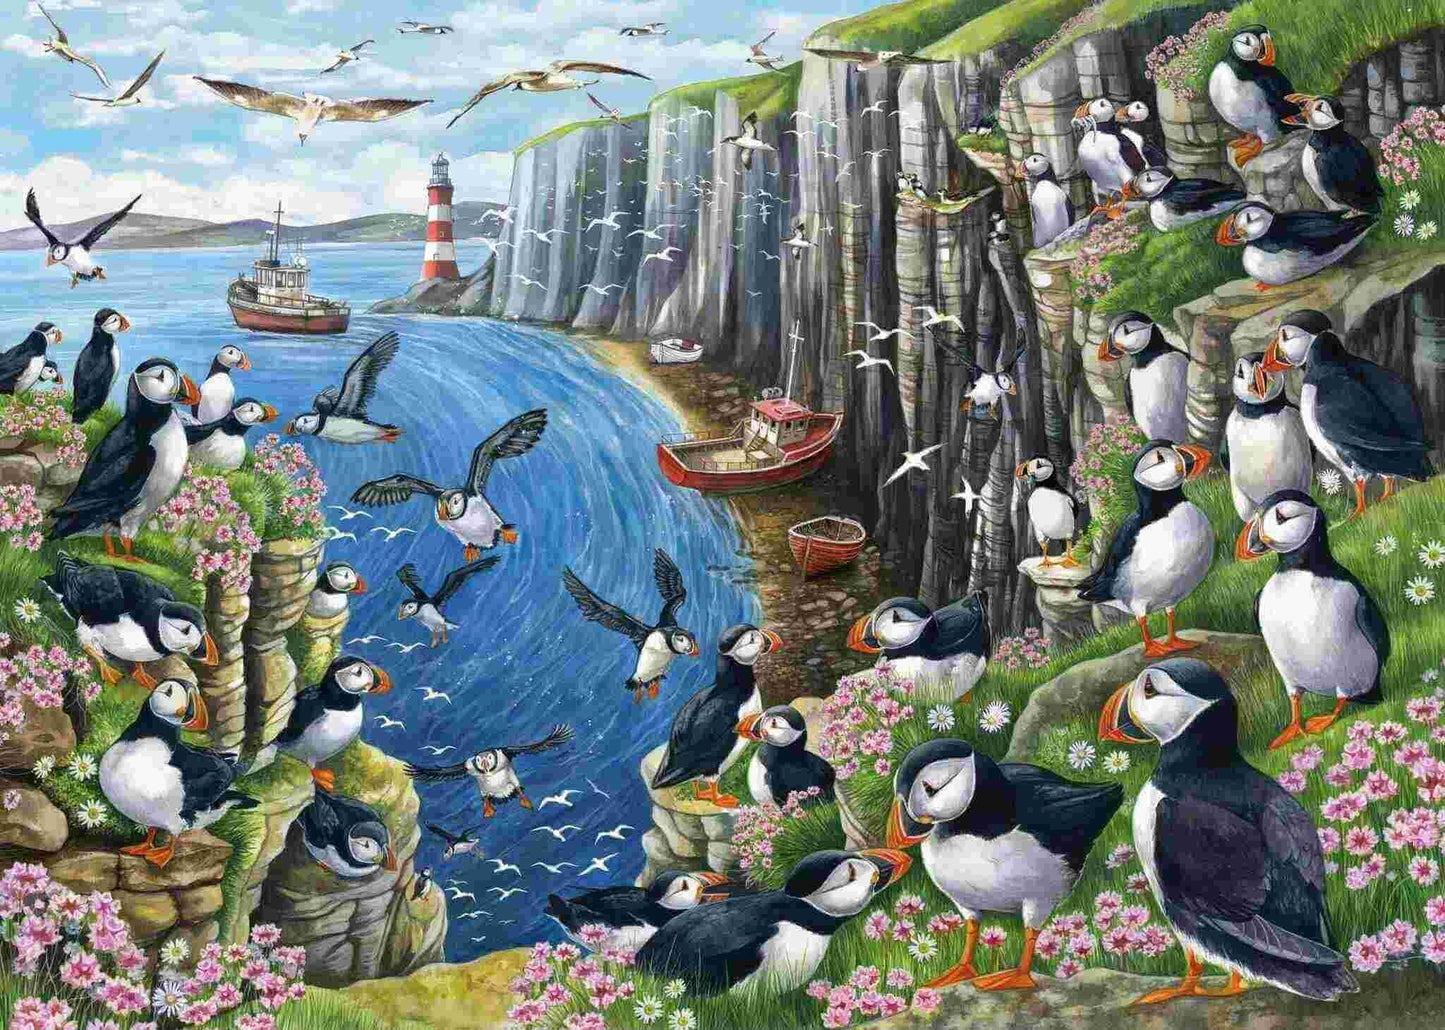 Otter House - Clifftop View - 1000 Piece Jigsaw Puzzle